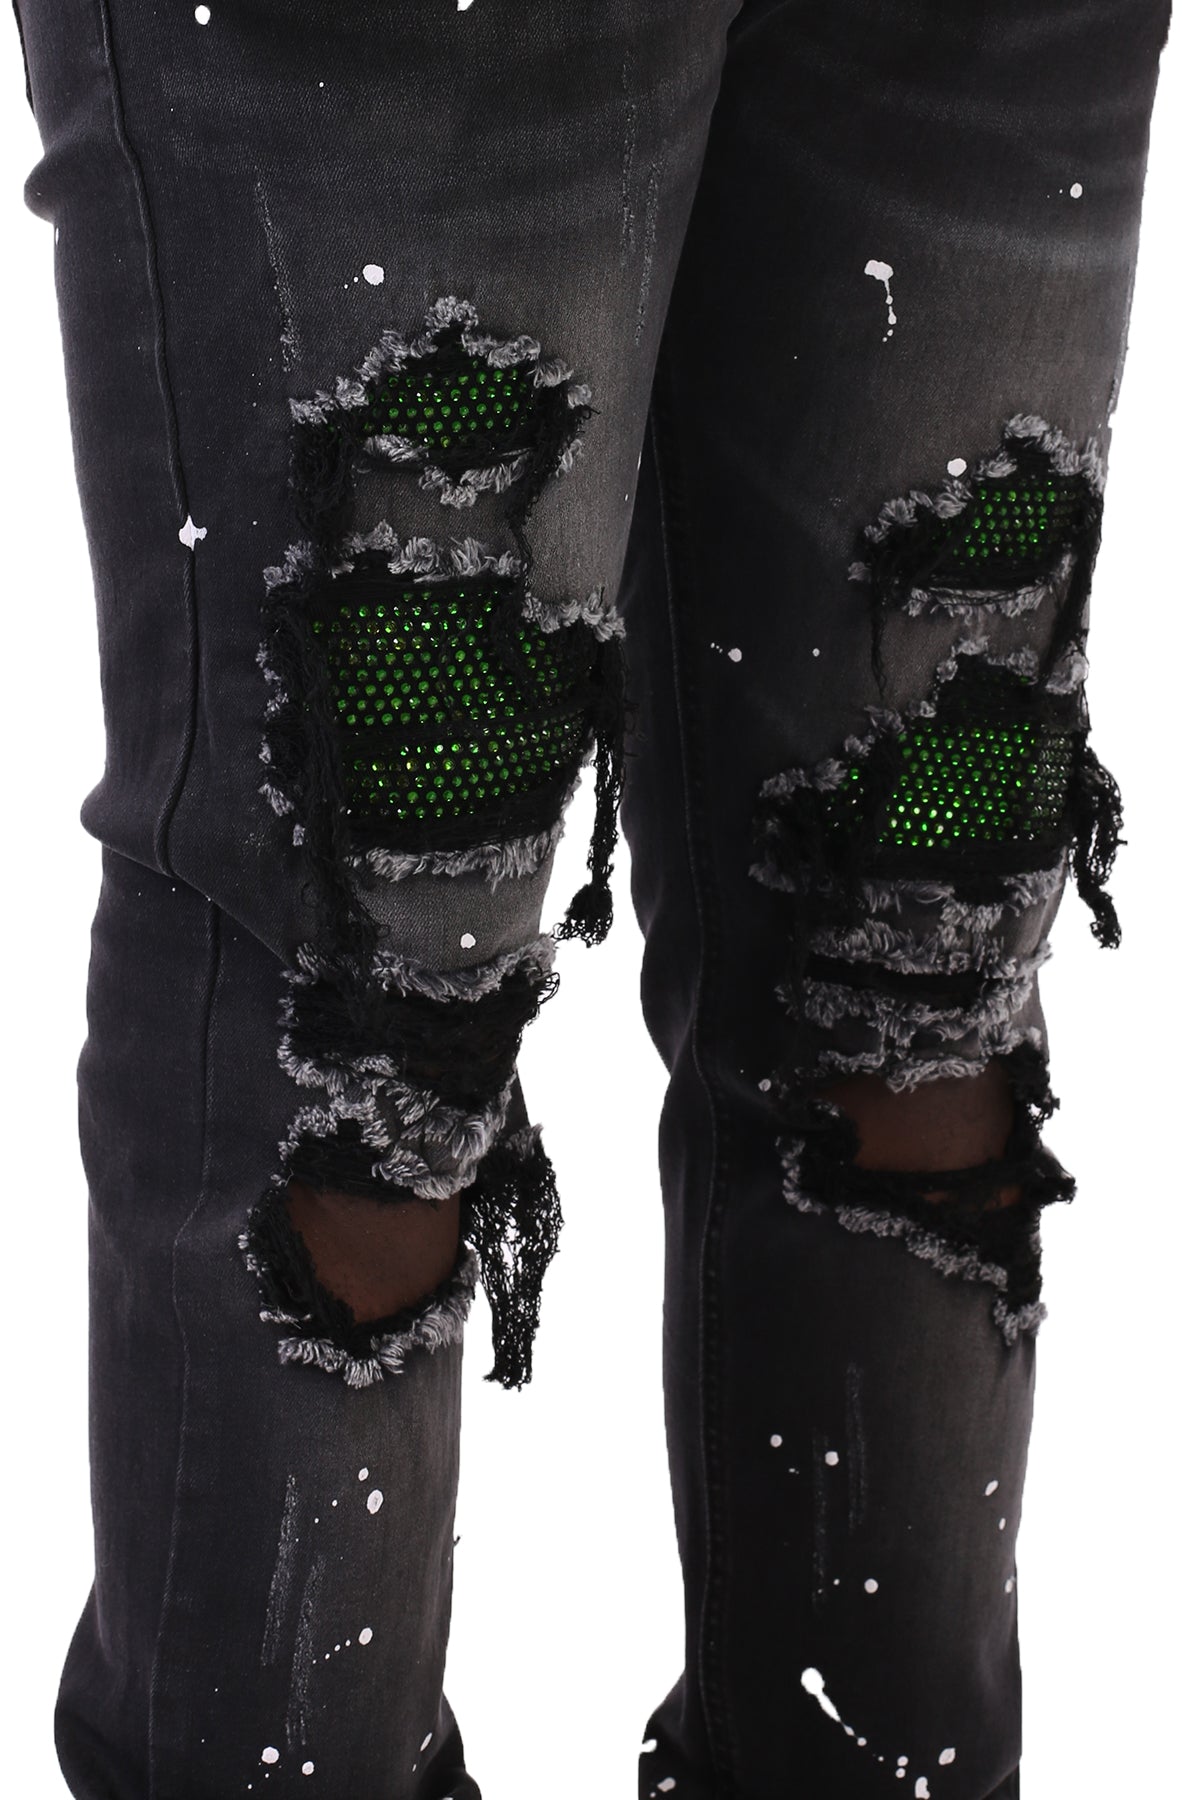 Green Rhinestones Patched Jeans (Black) (6562301182054)